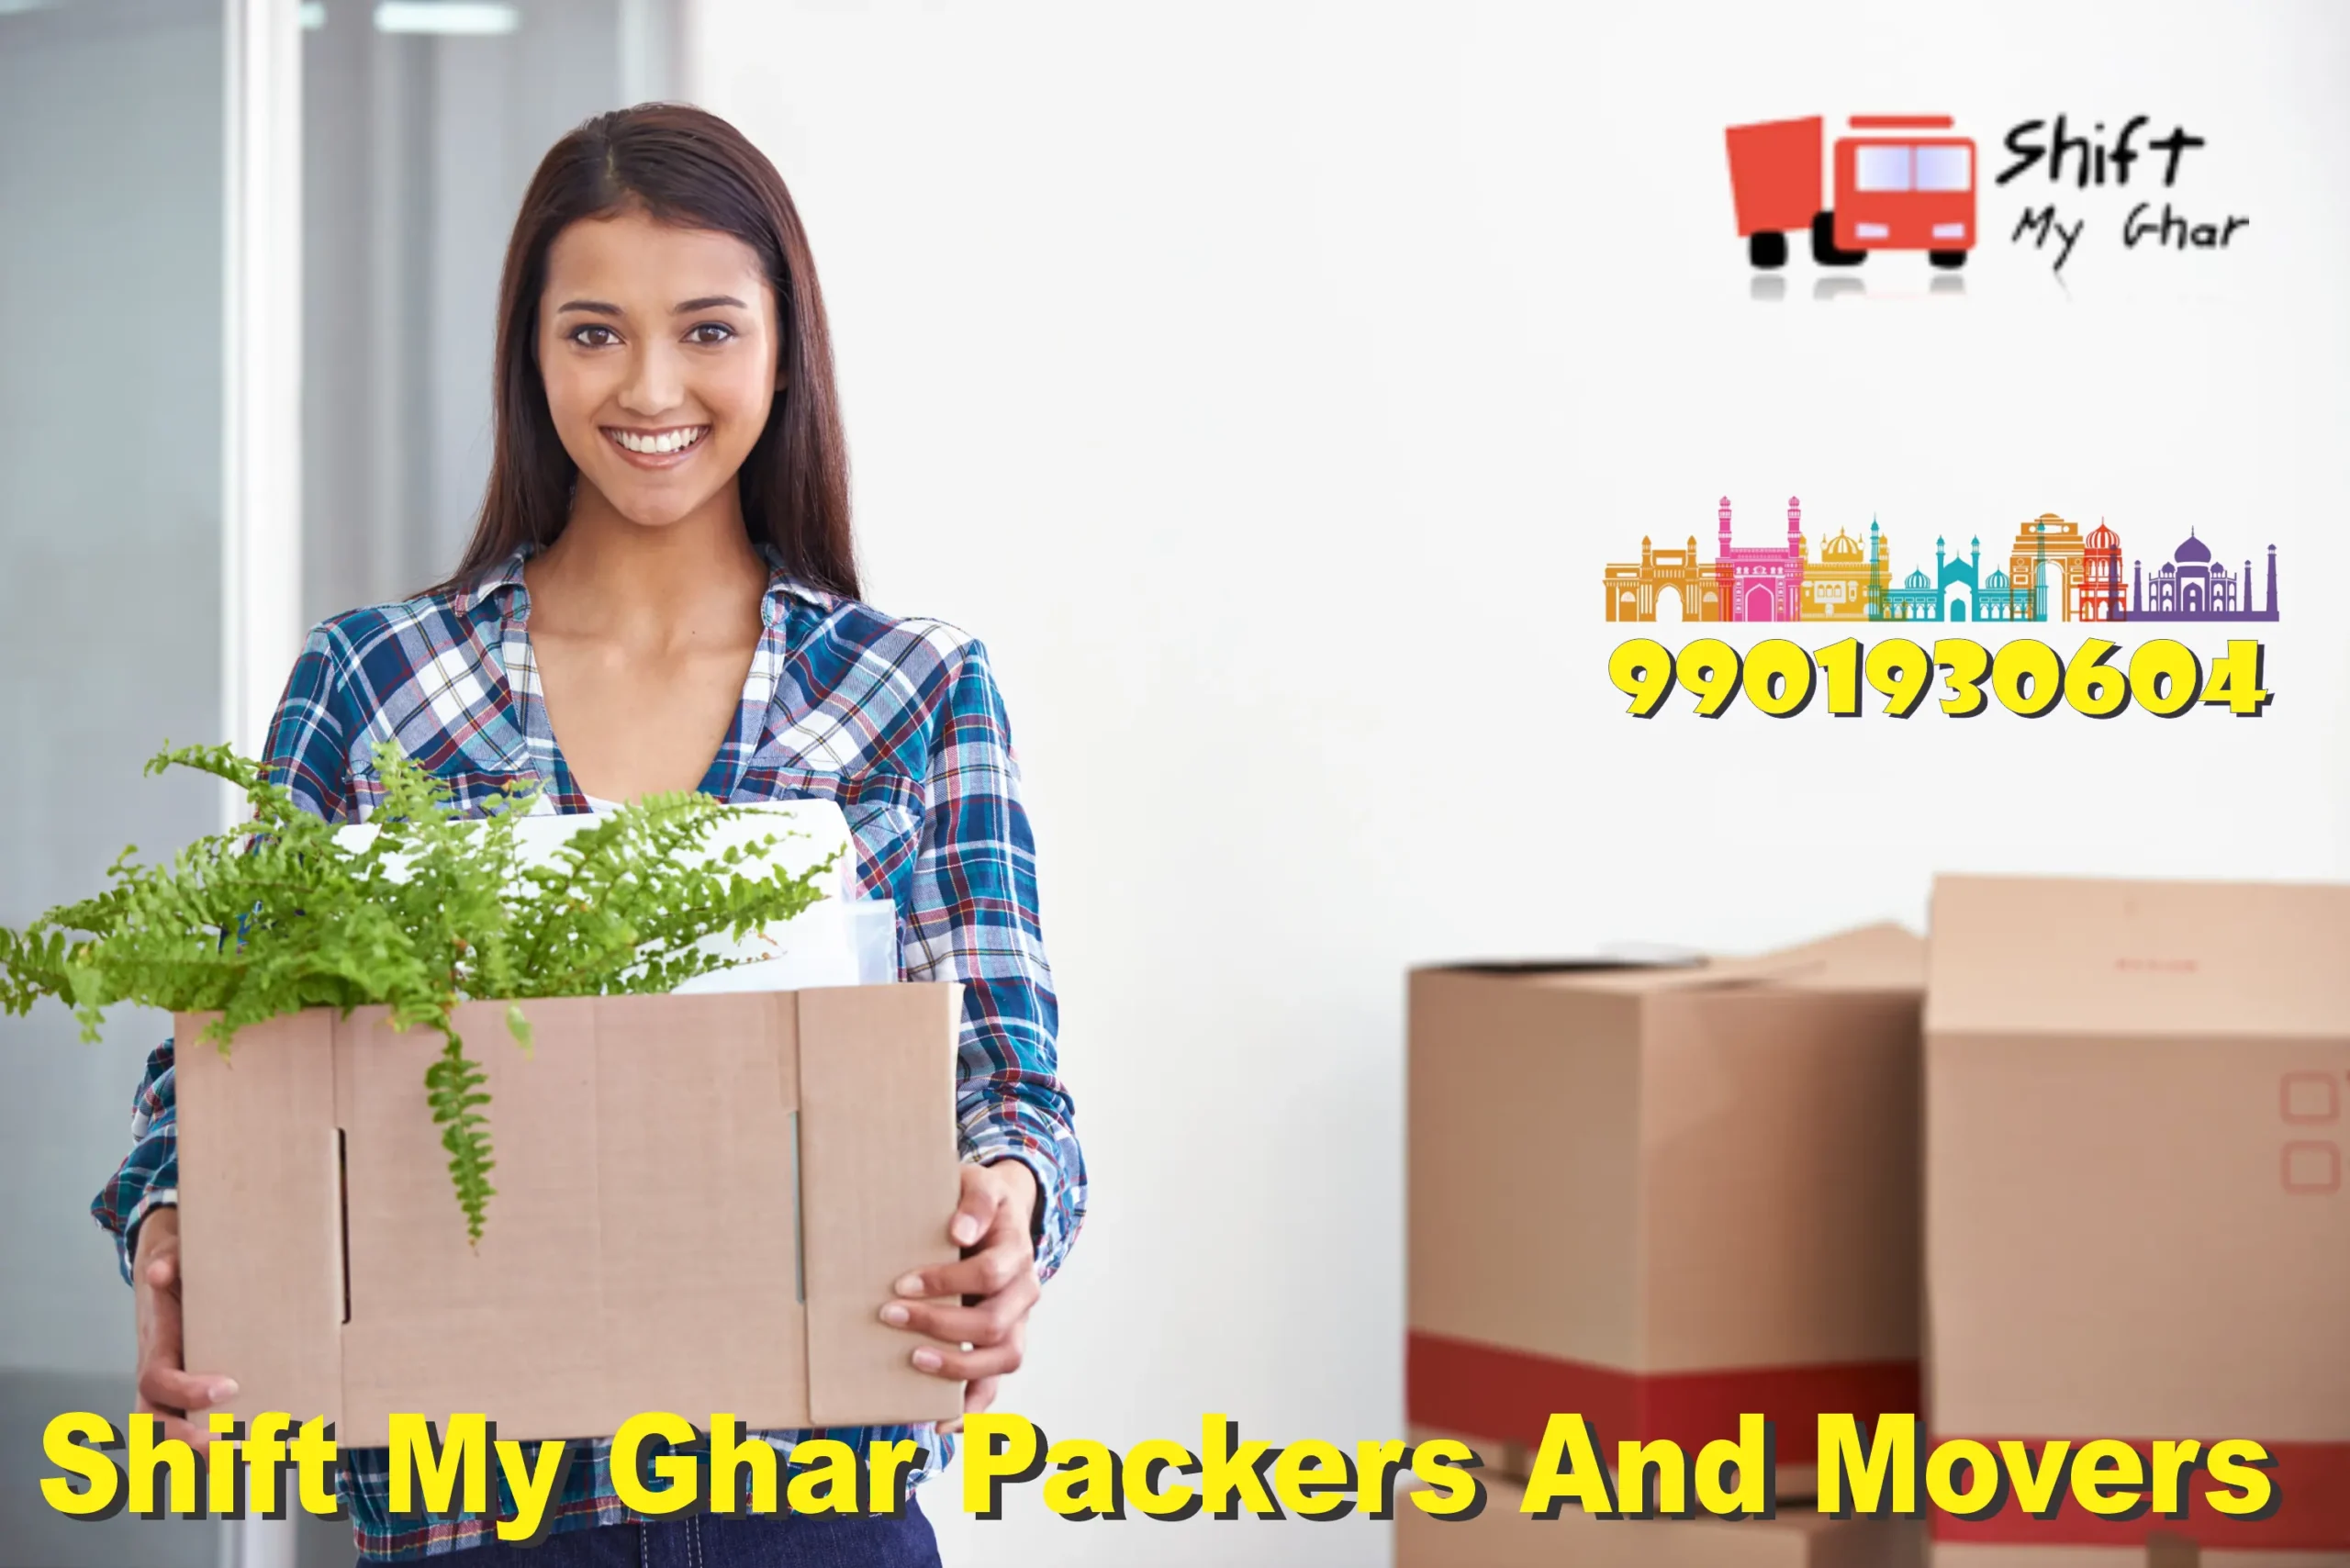 Packers And Movers hsr Layout